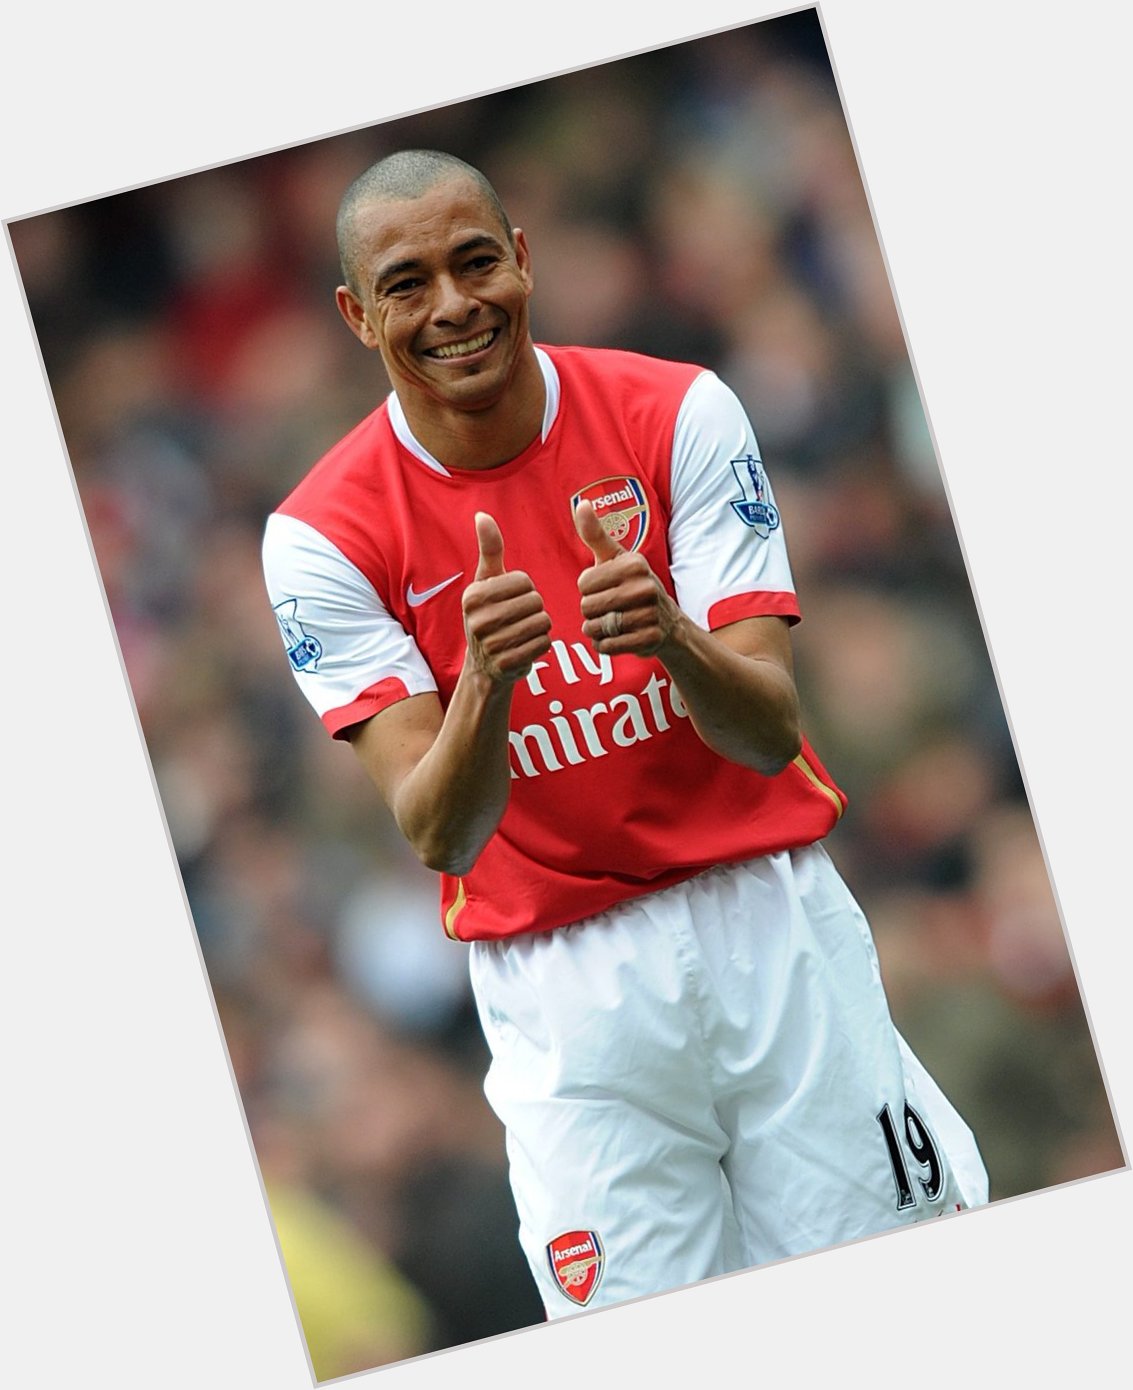 Happy 45th birthday to Gilberto Silva! Hope you had a great day, legend.    